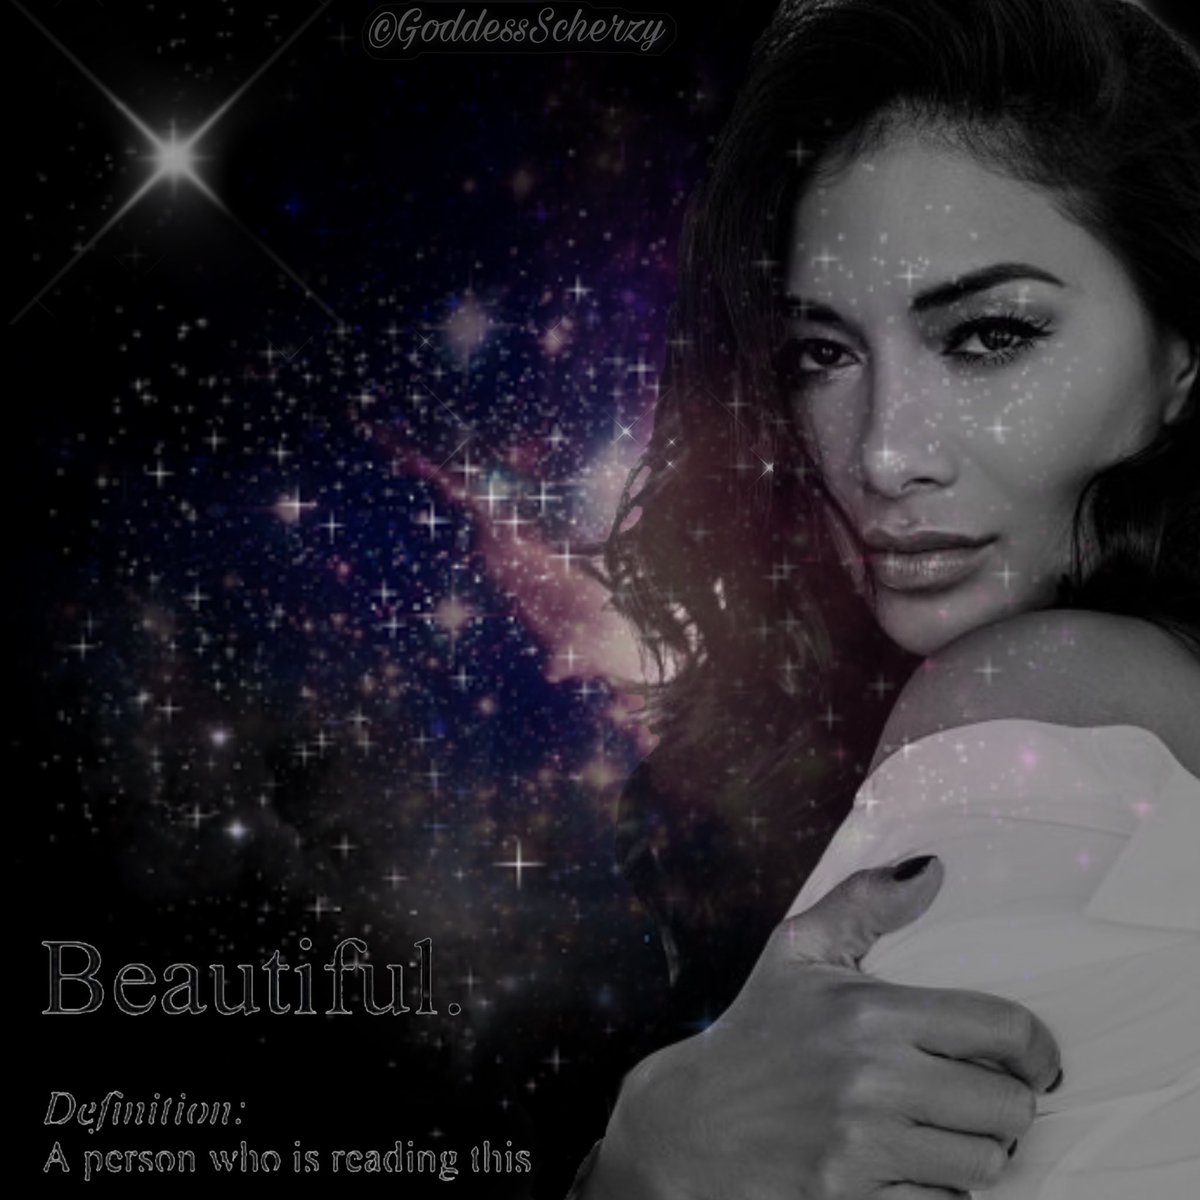 If you haven’t heard it today - you are beautiful, strong, unique ❣️ you are worth it and you matter, always 💋 #nicolescherzinger #goddess #youreenough